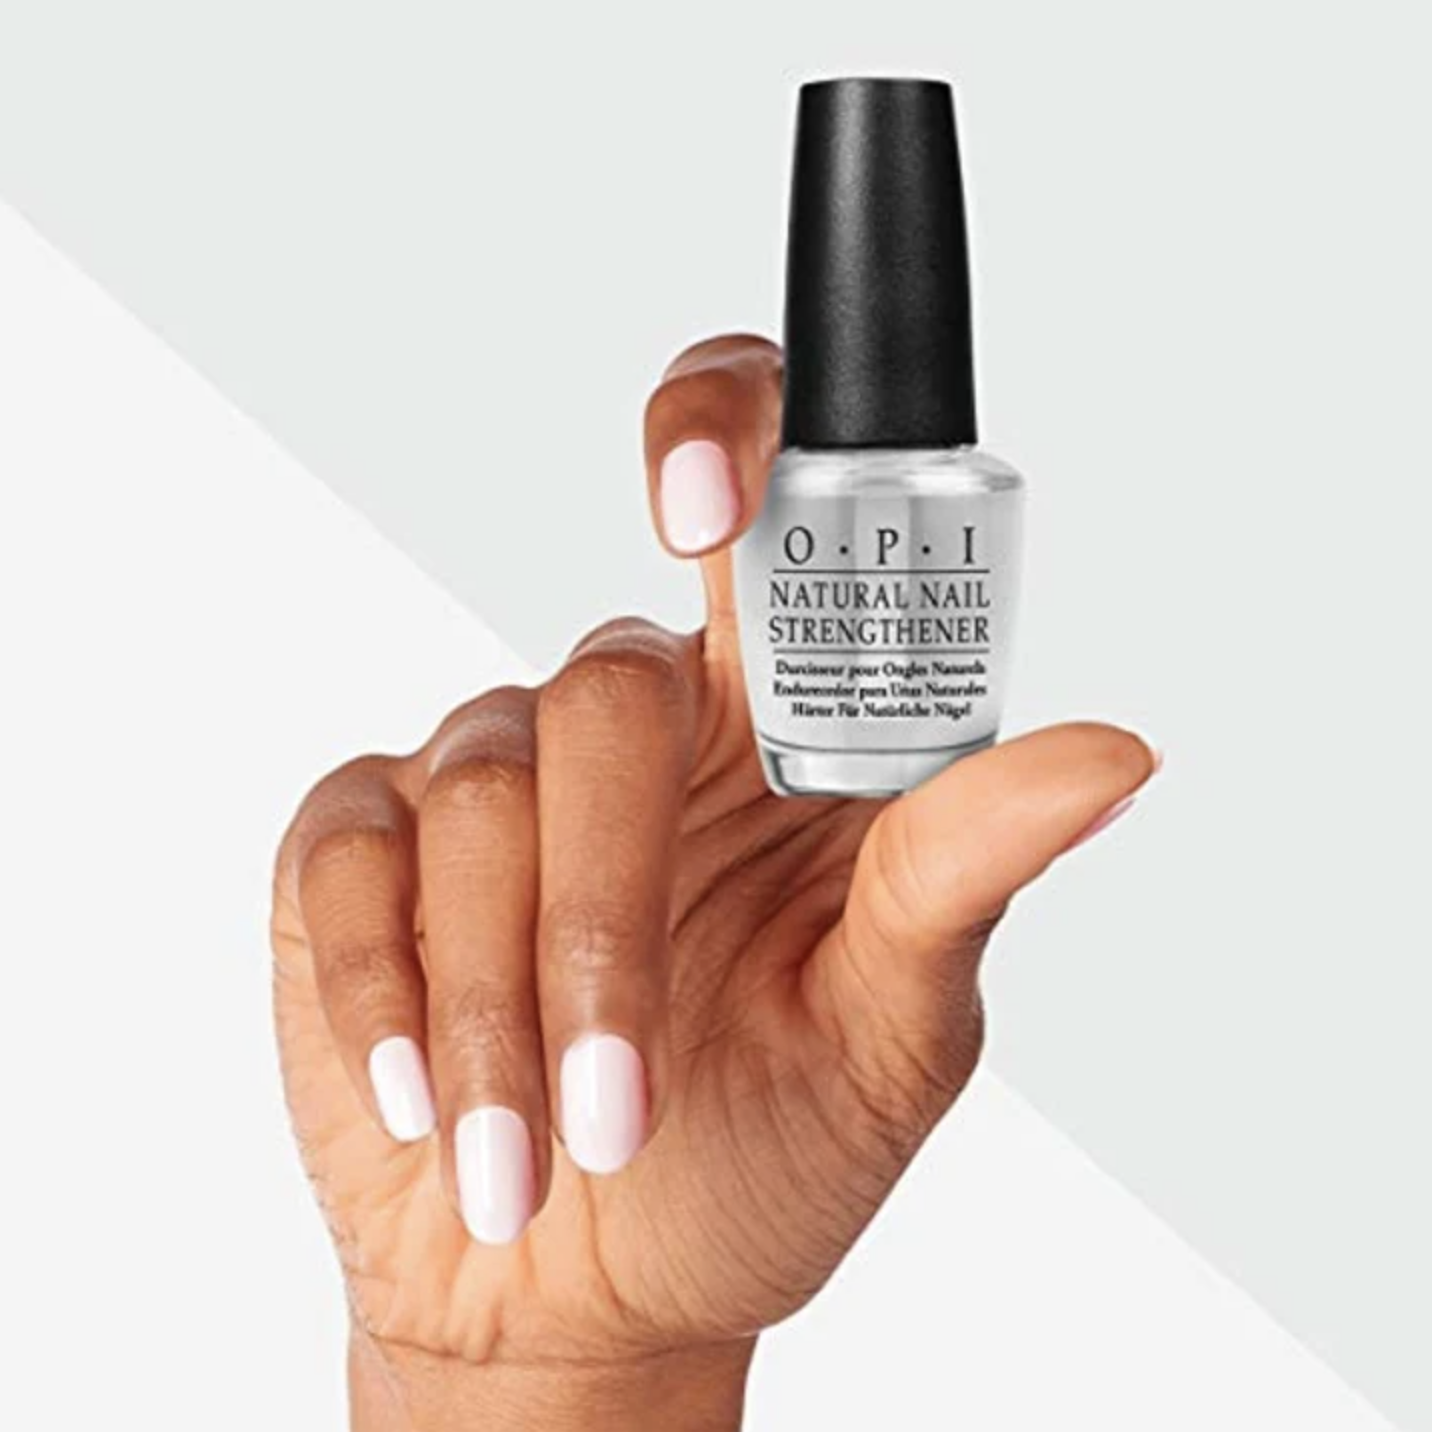 From Brittle To Brilliant: Stylish.ae’s Solutions For Stronger Nails